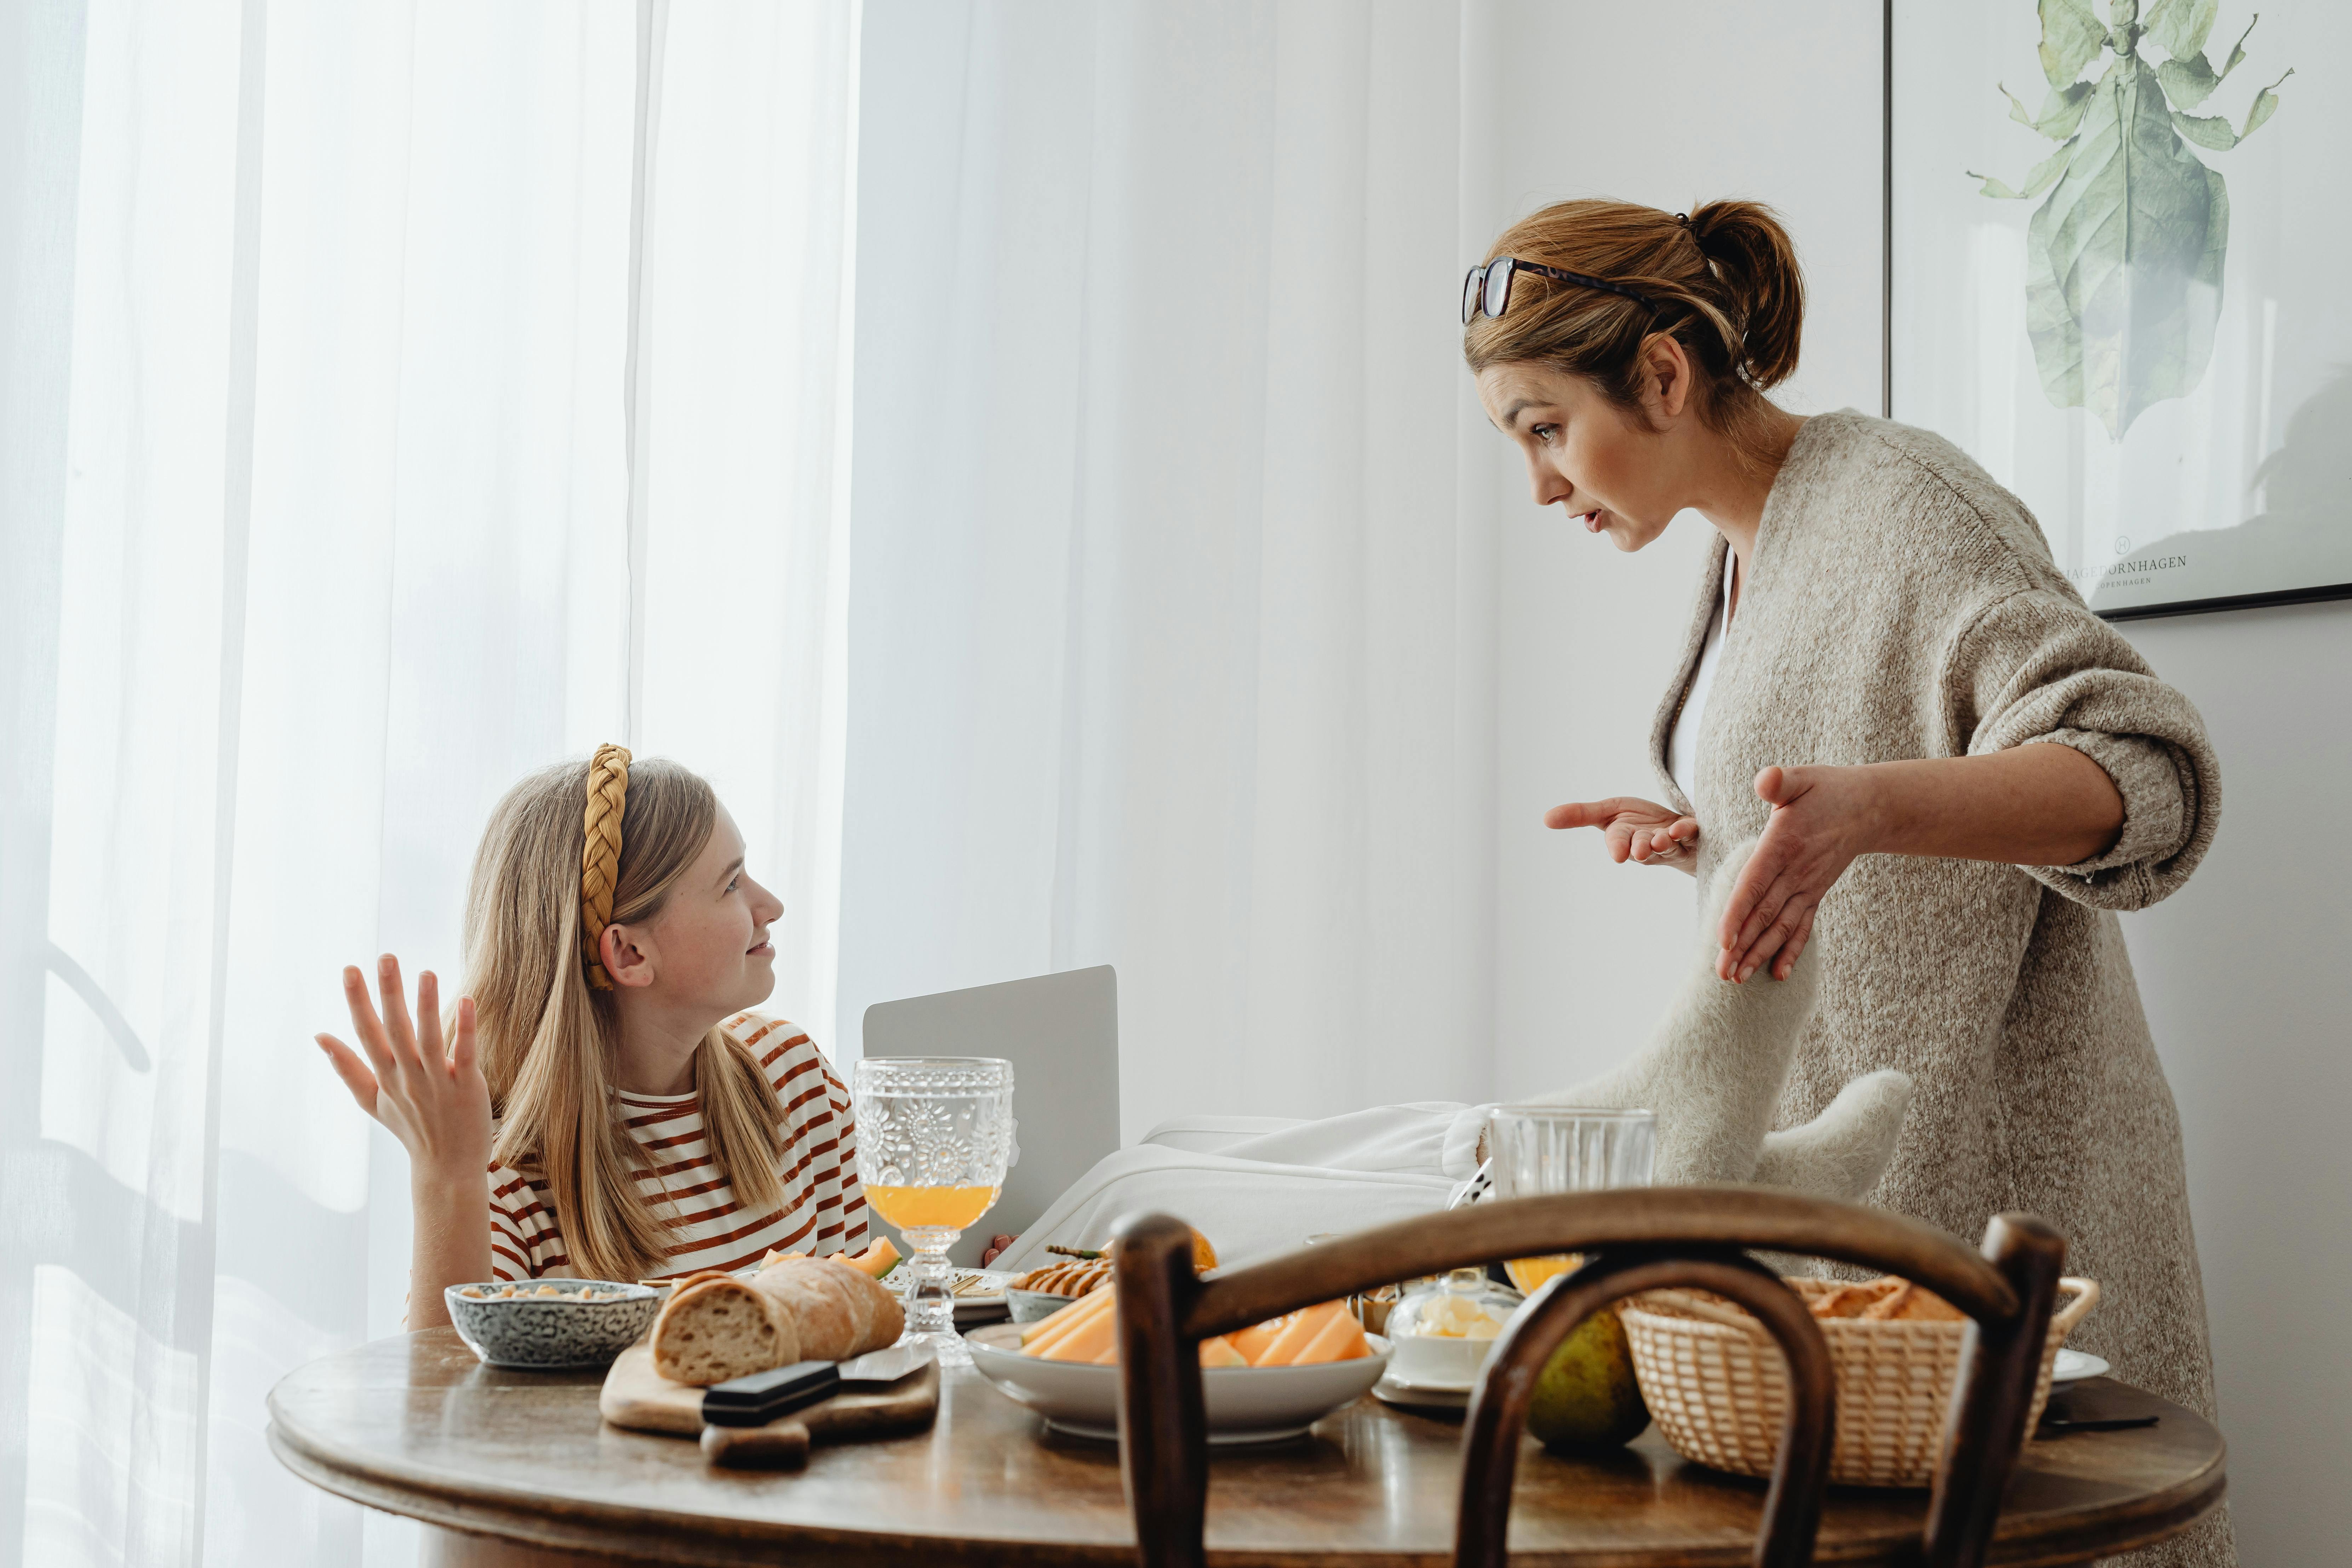 Mother and daughter arguing | Source: Pexels